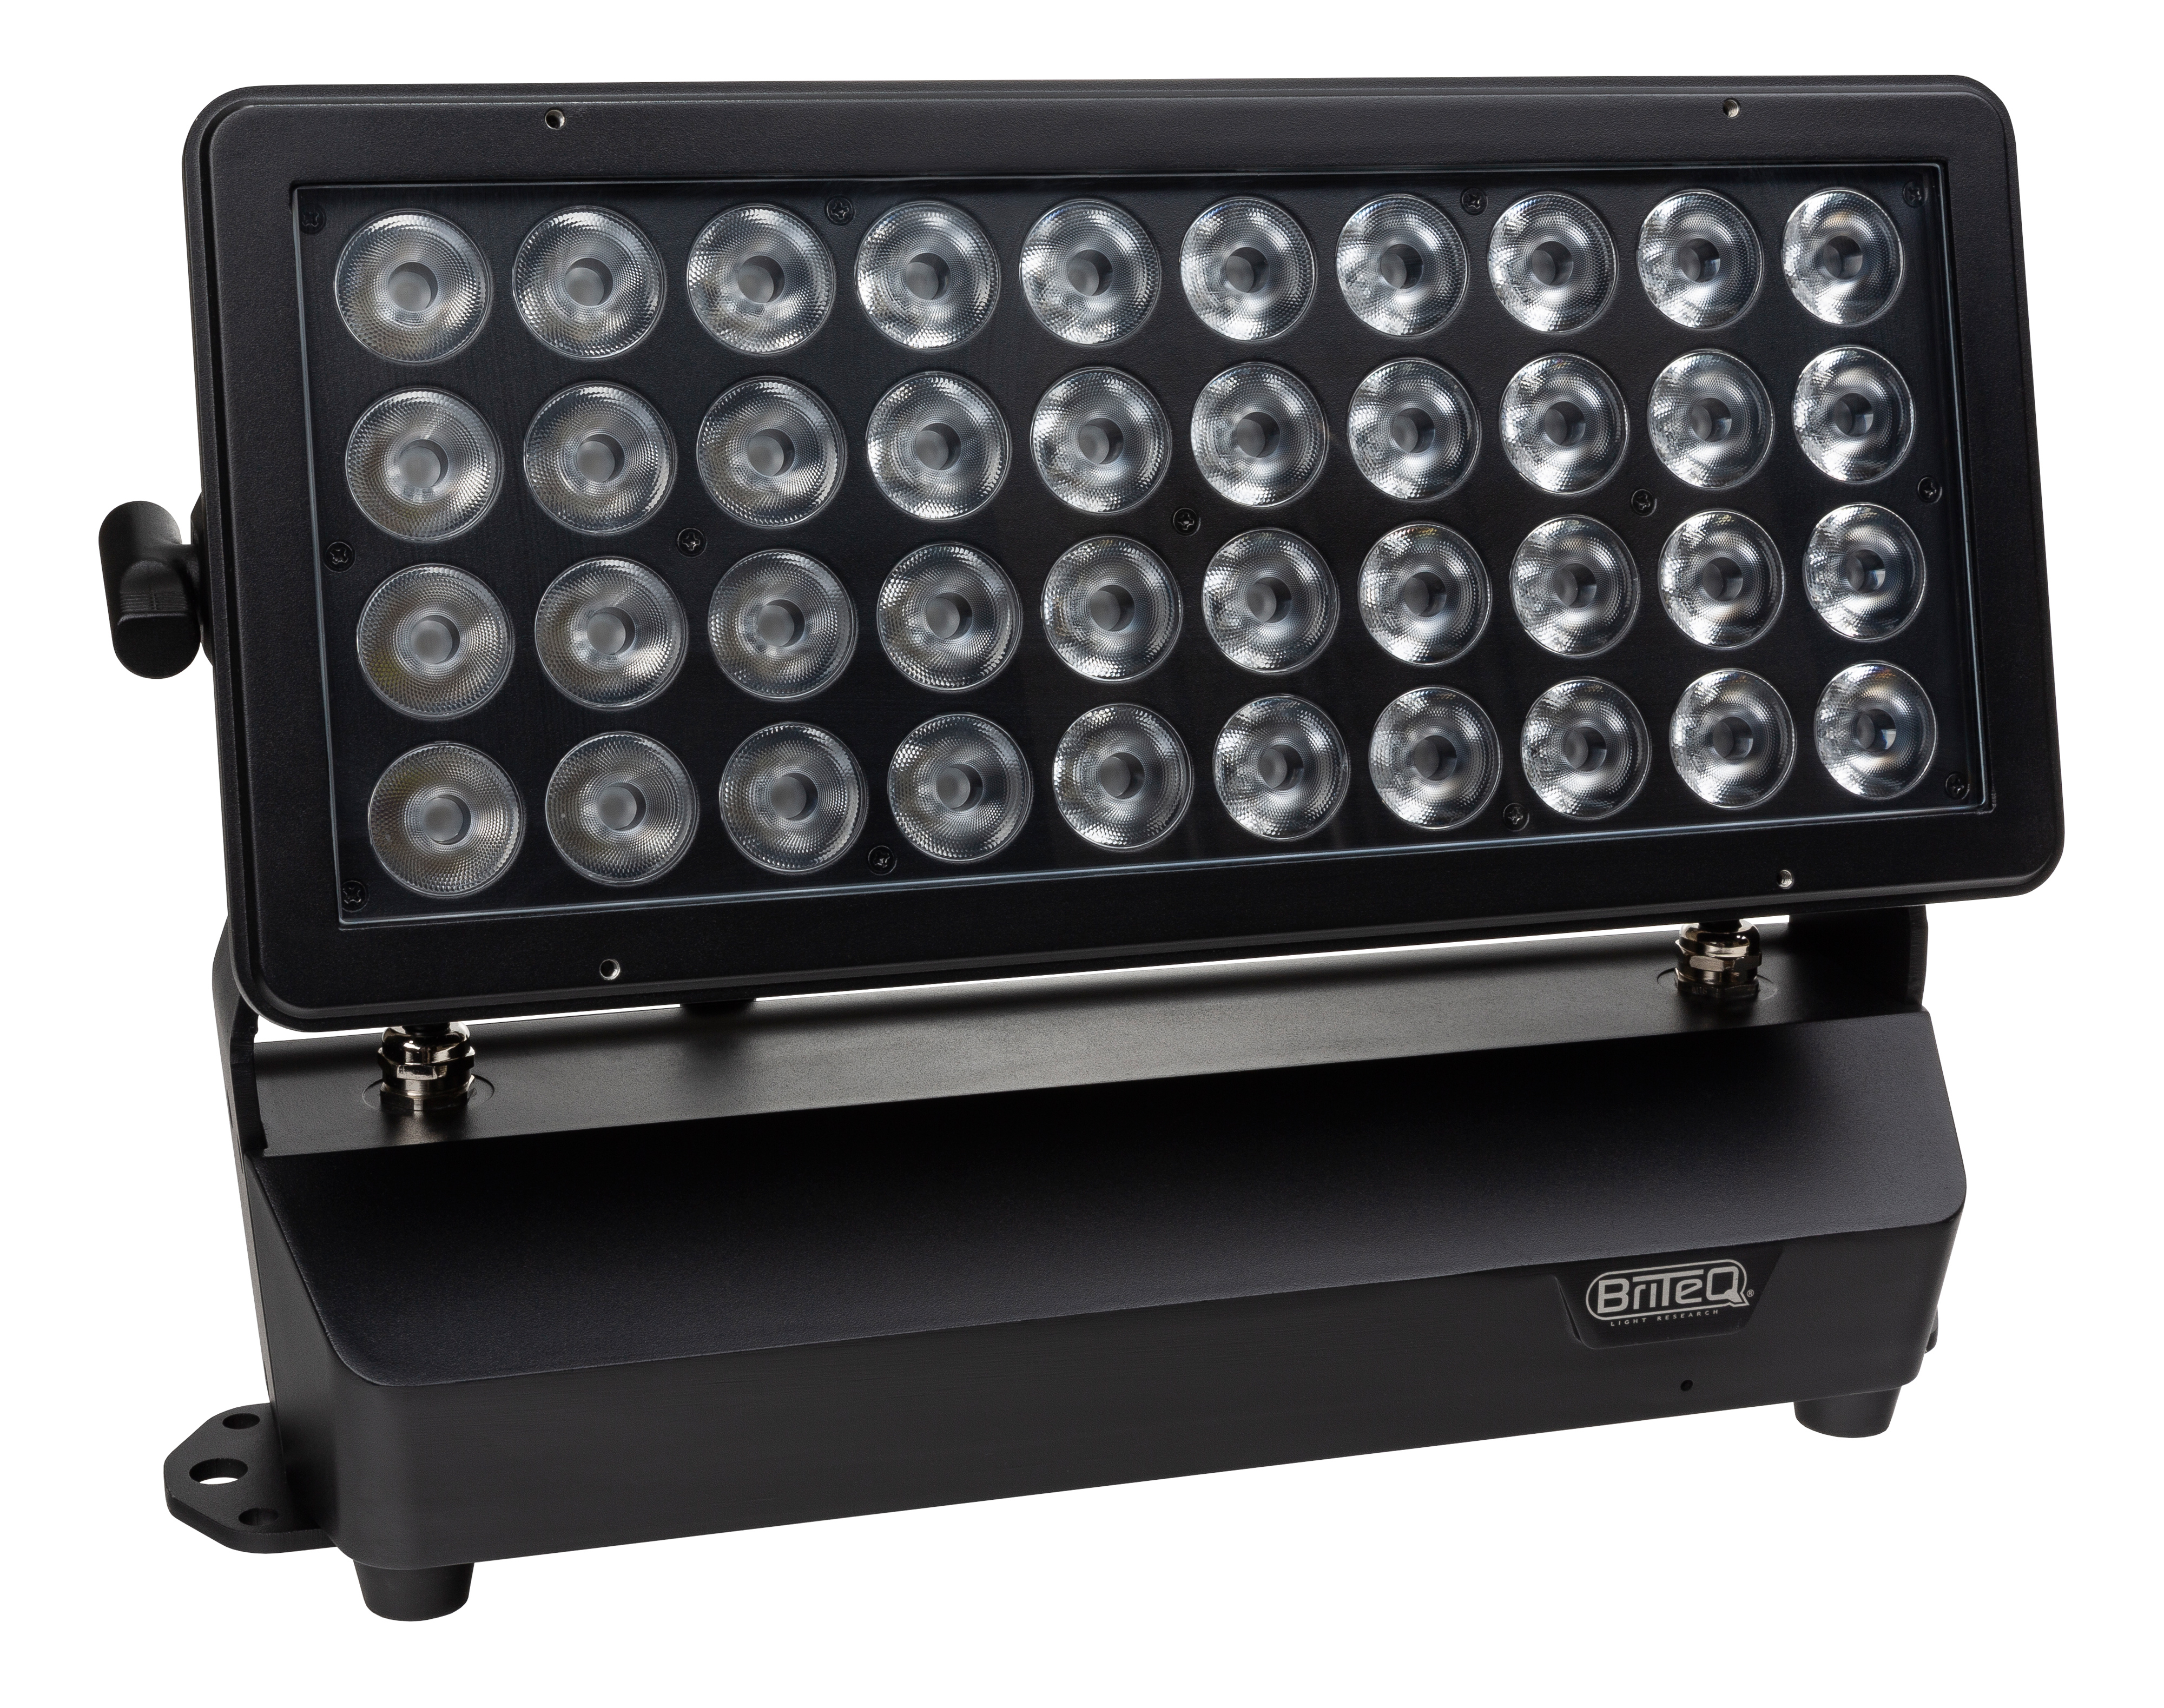 Powerful IP65 indoor and outdoor LED projector (40x 20W RGBL LEDs) for the entertainment and rental industry or fixed installations